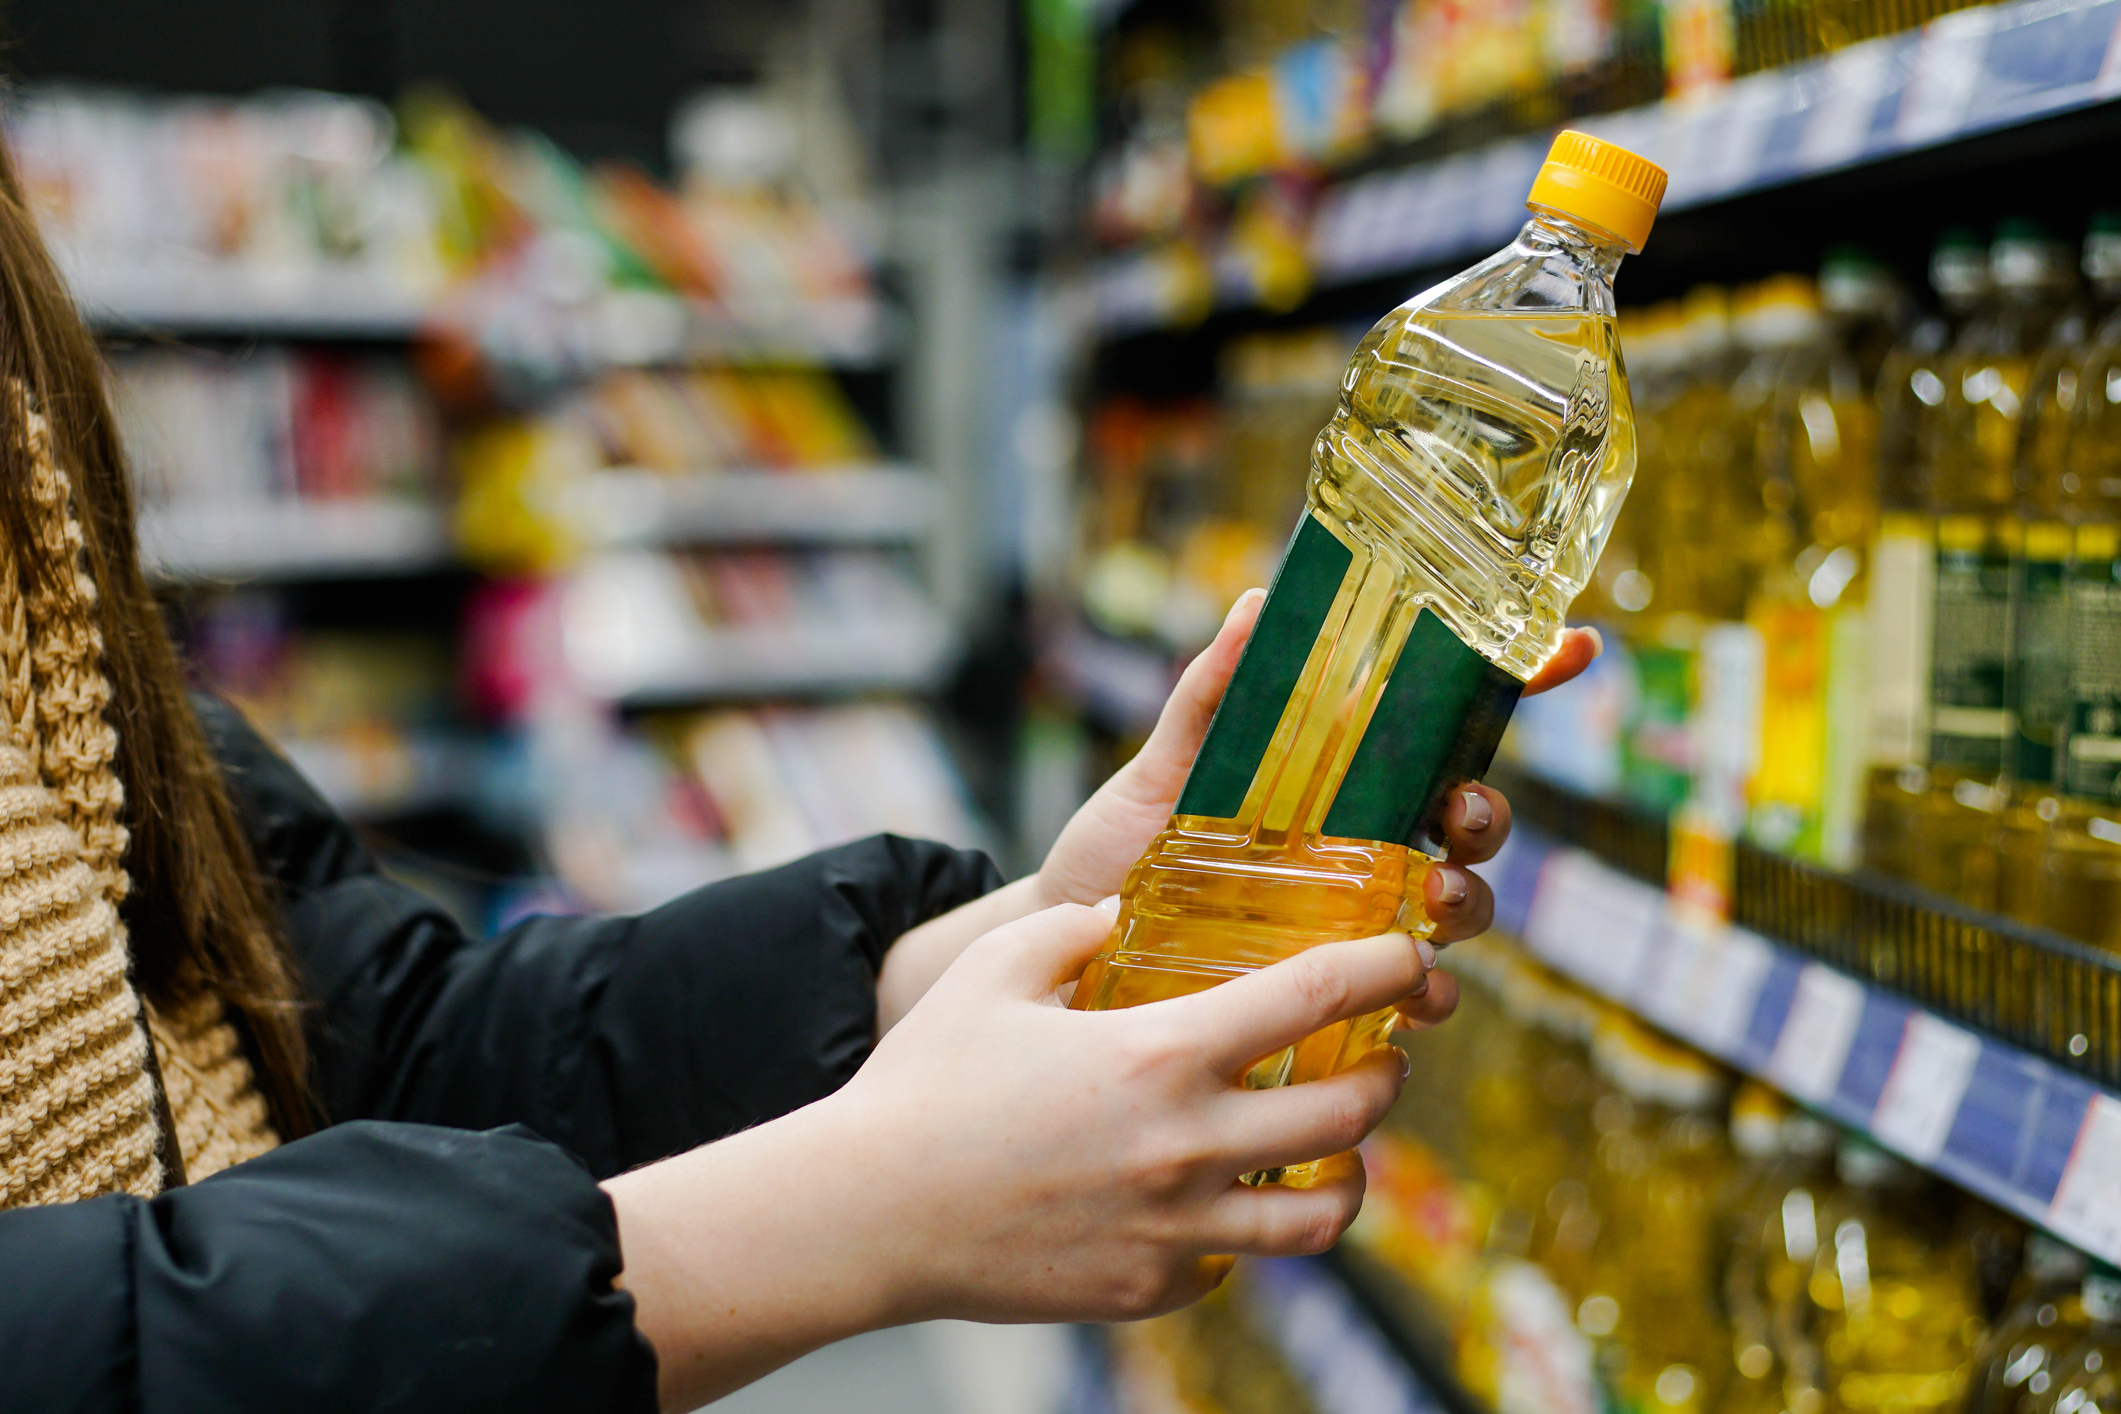 A shopper examines a bottle of oil in a grocery store aisle.